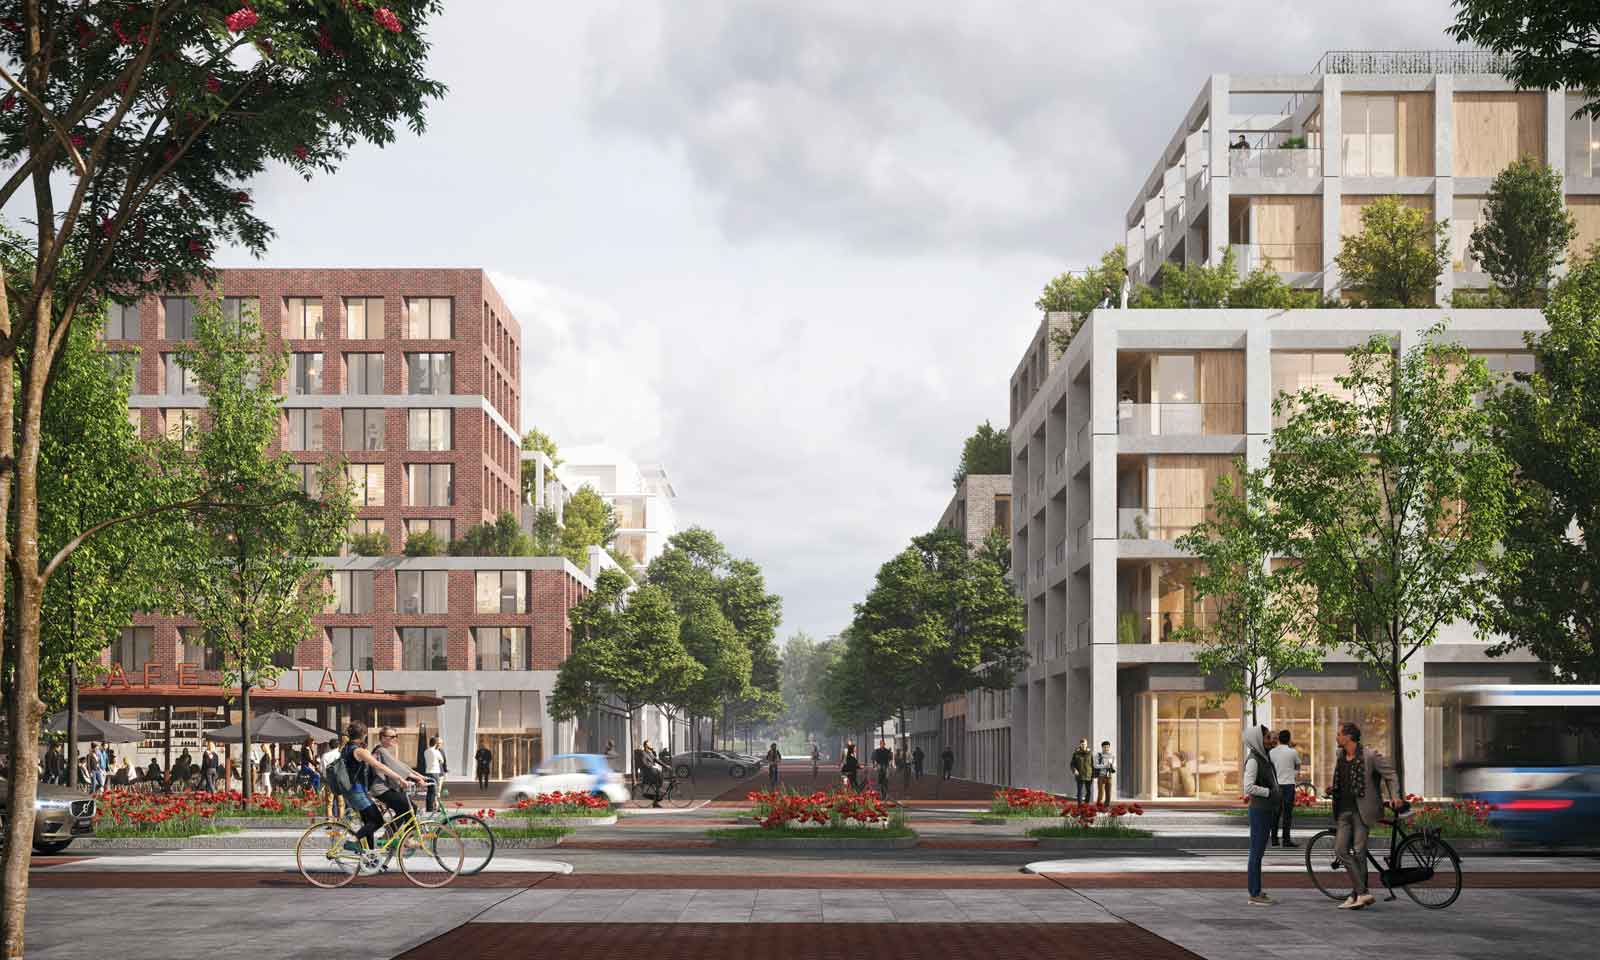 streetlevel image looking across the Klaprozenweg into the Draaierweg with a square to the left in project Klaprozenbuurt by BETA architect Amsterdam Evert Klinkenberg Auguste Gus van Oppen